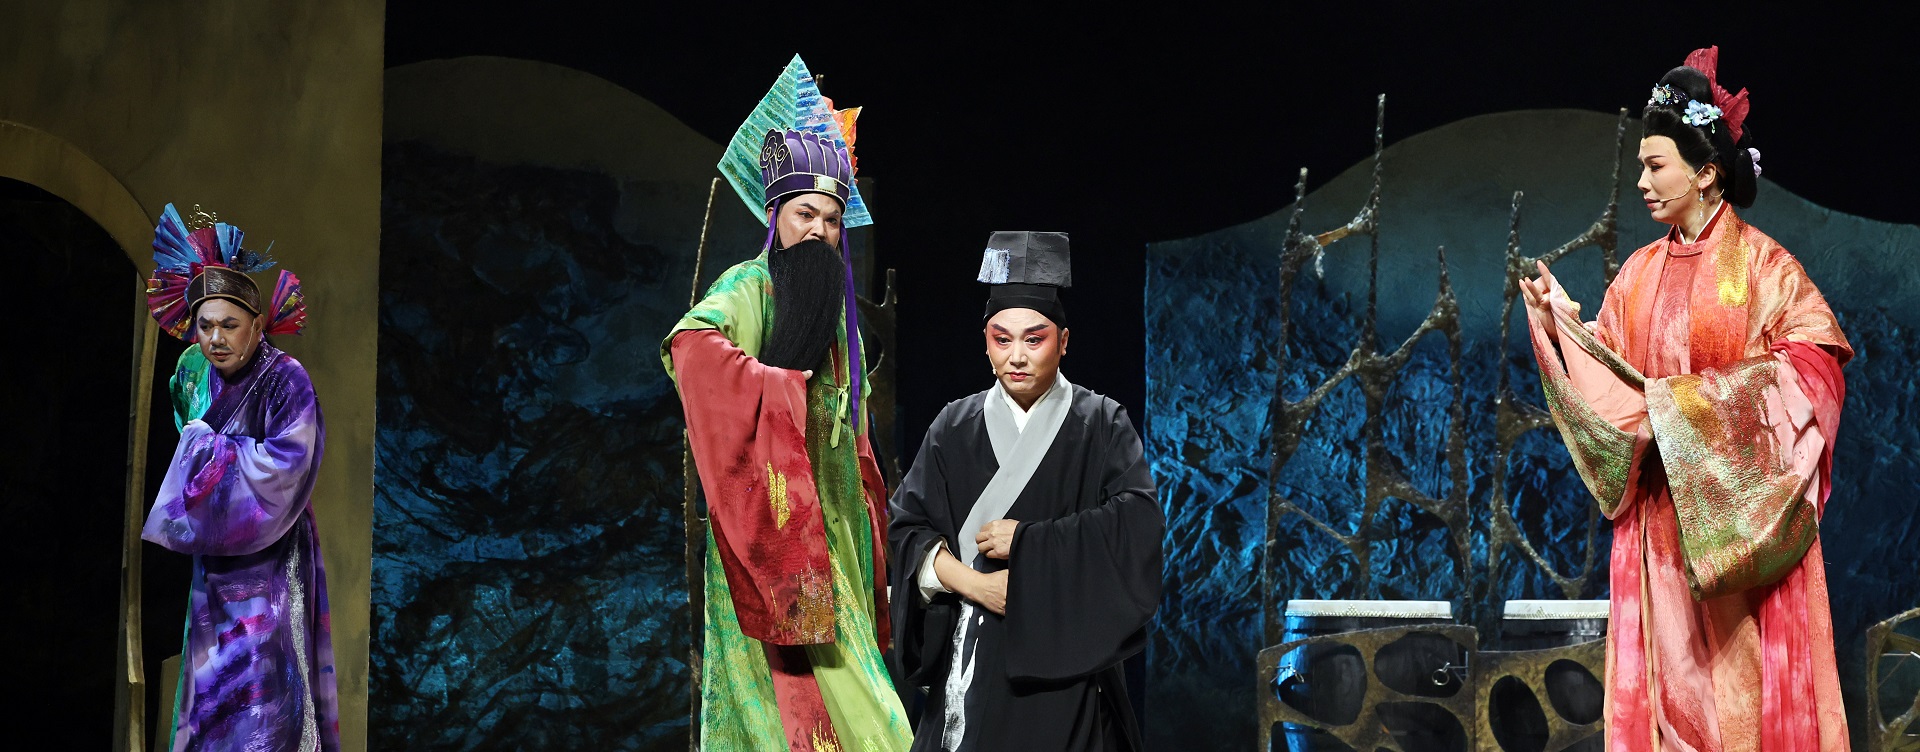 Tongzhou intangible cultures unleash charm through innovation